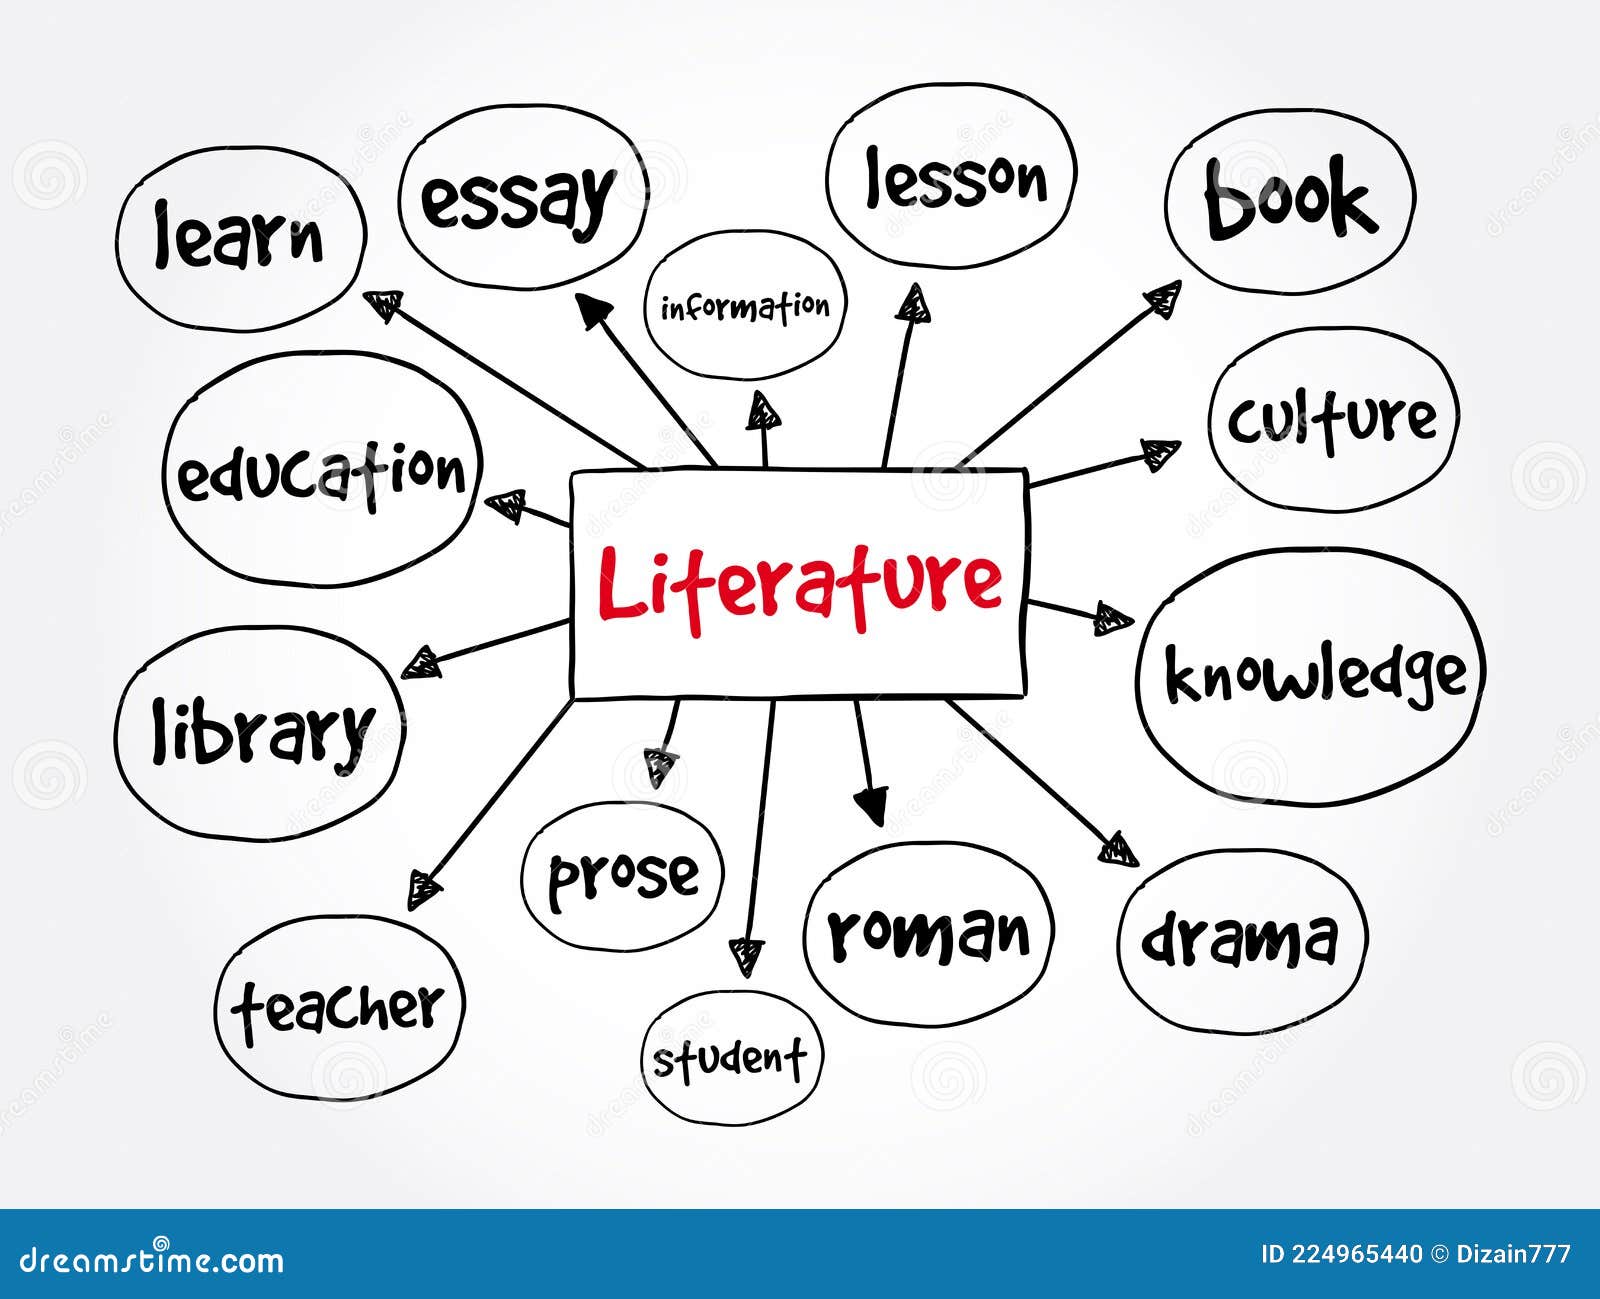 what is literature in education